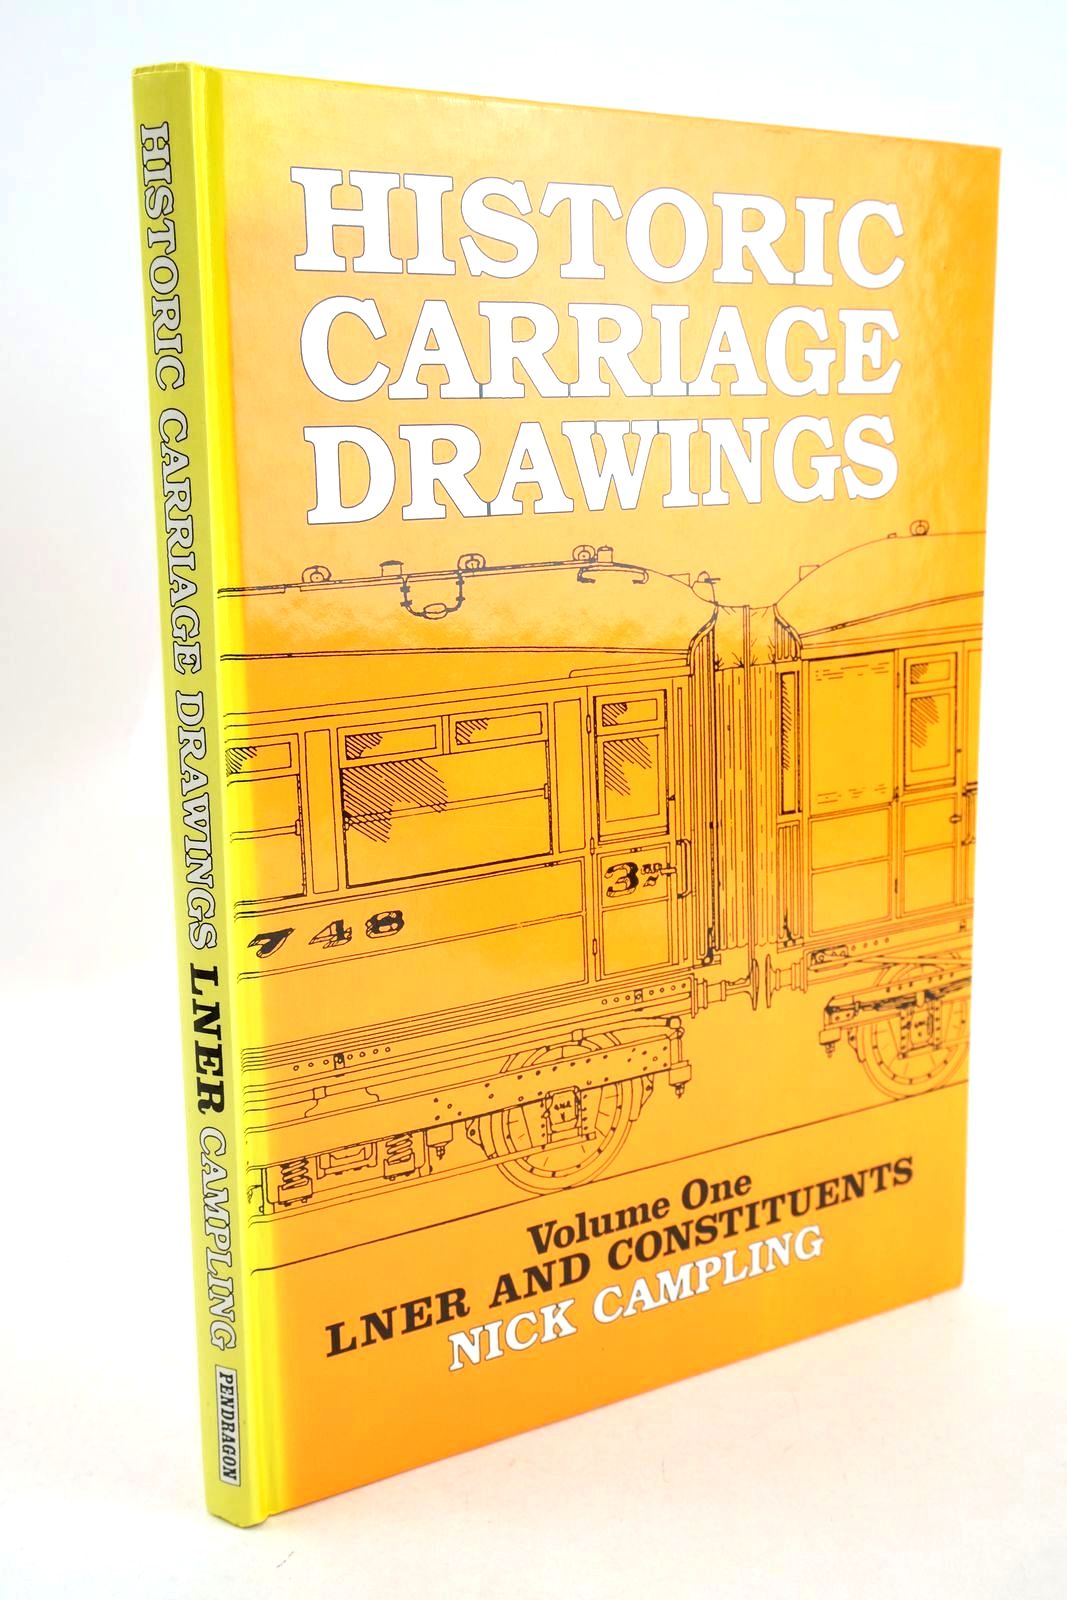 Photo of HISTORIC CARRIAGE DRAWINGS VOLUME ONE: LNER AND CONSTITUENTS- Stock Number: 1327107